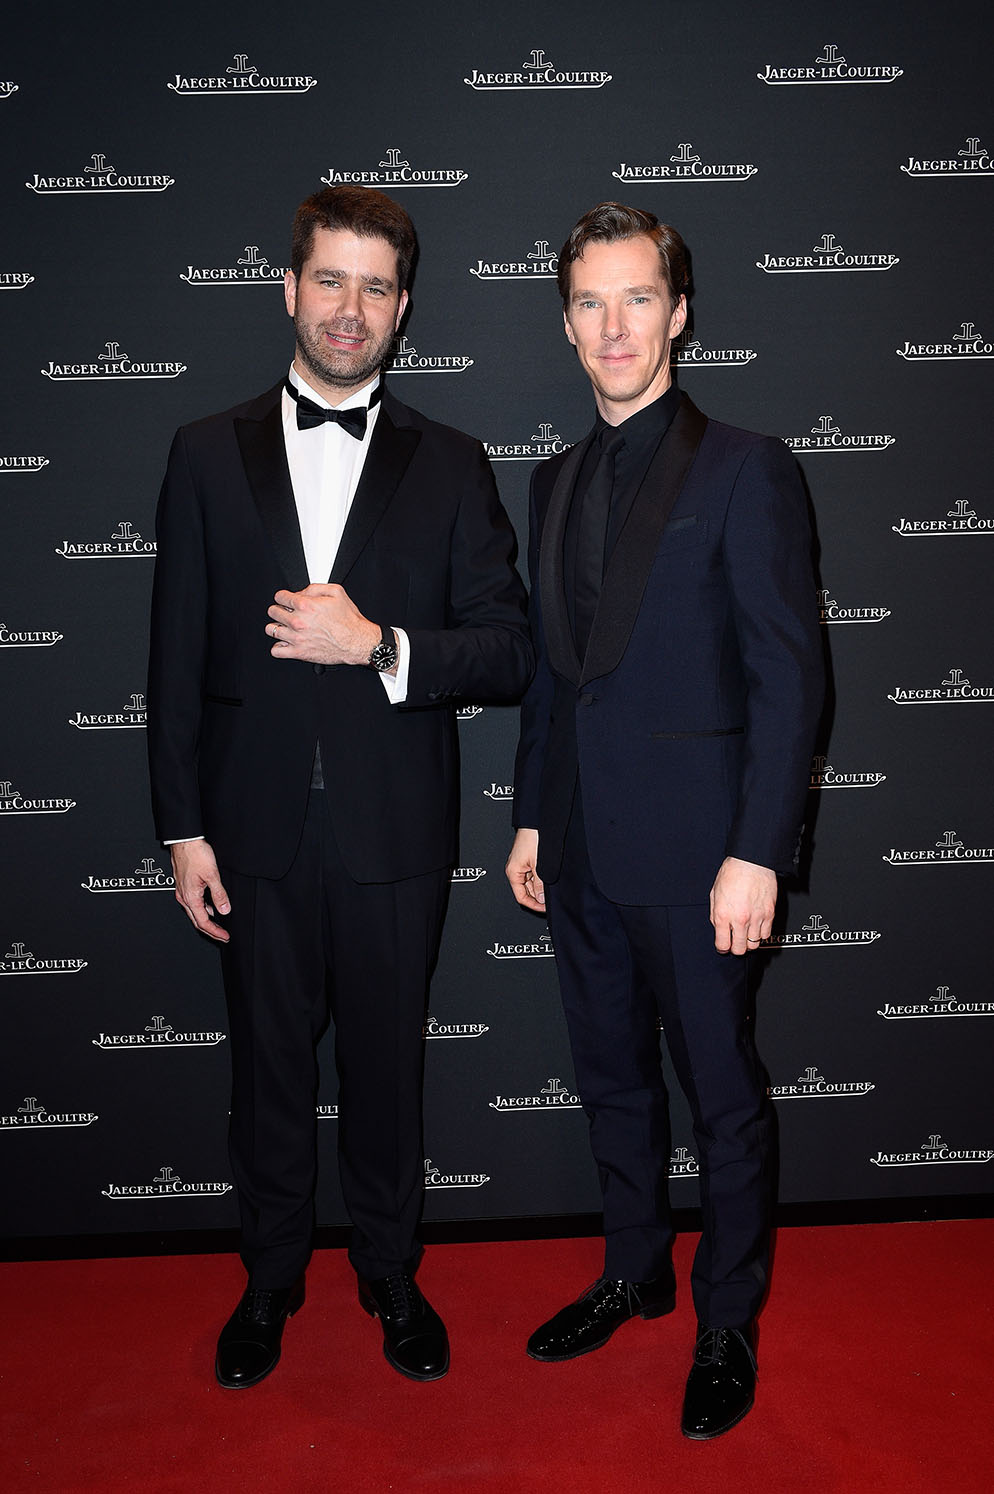 Les acacias, switzerland - january 15:  benedict cumberbatch (r) and geoffroy lefebvre attend jaeger-lecoultre polaris gala evening at the sihh 2018 at pavillon sicli on january 15, 2018 in les acacias, switzerland. (photo by kristy sparow/getty images for jaeger-lecoultre) *** local caption *** benedict cumberbatch; geoffroy lefebvre